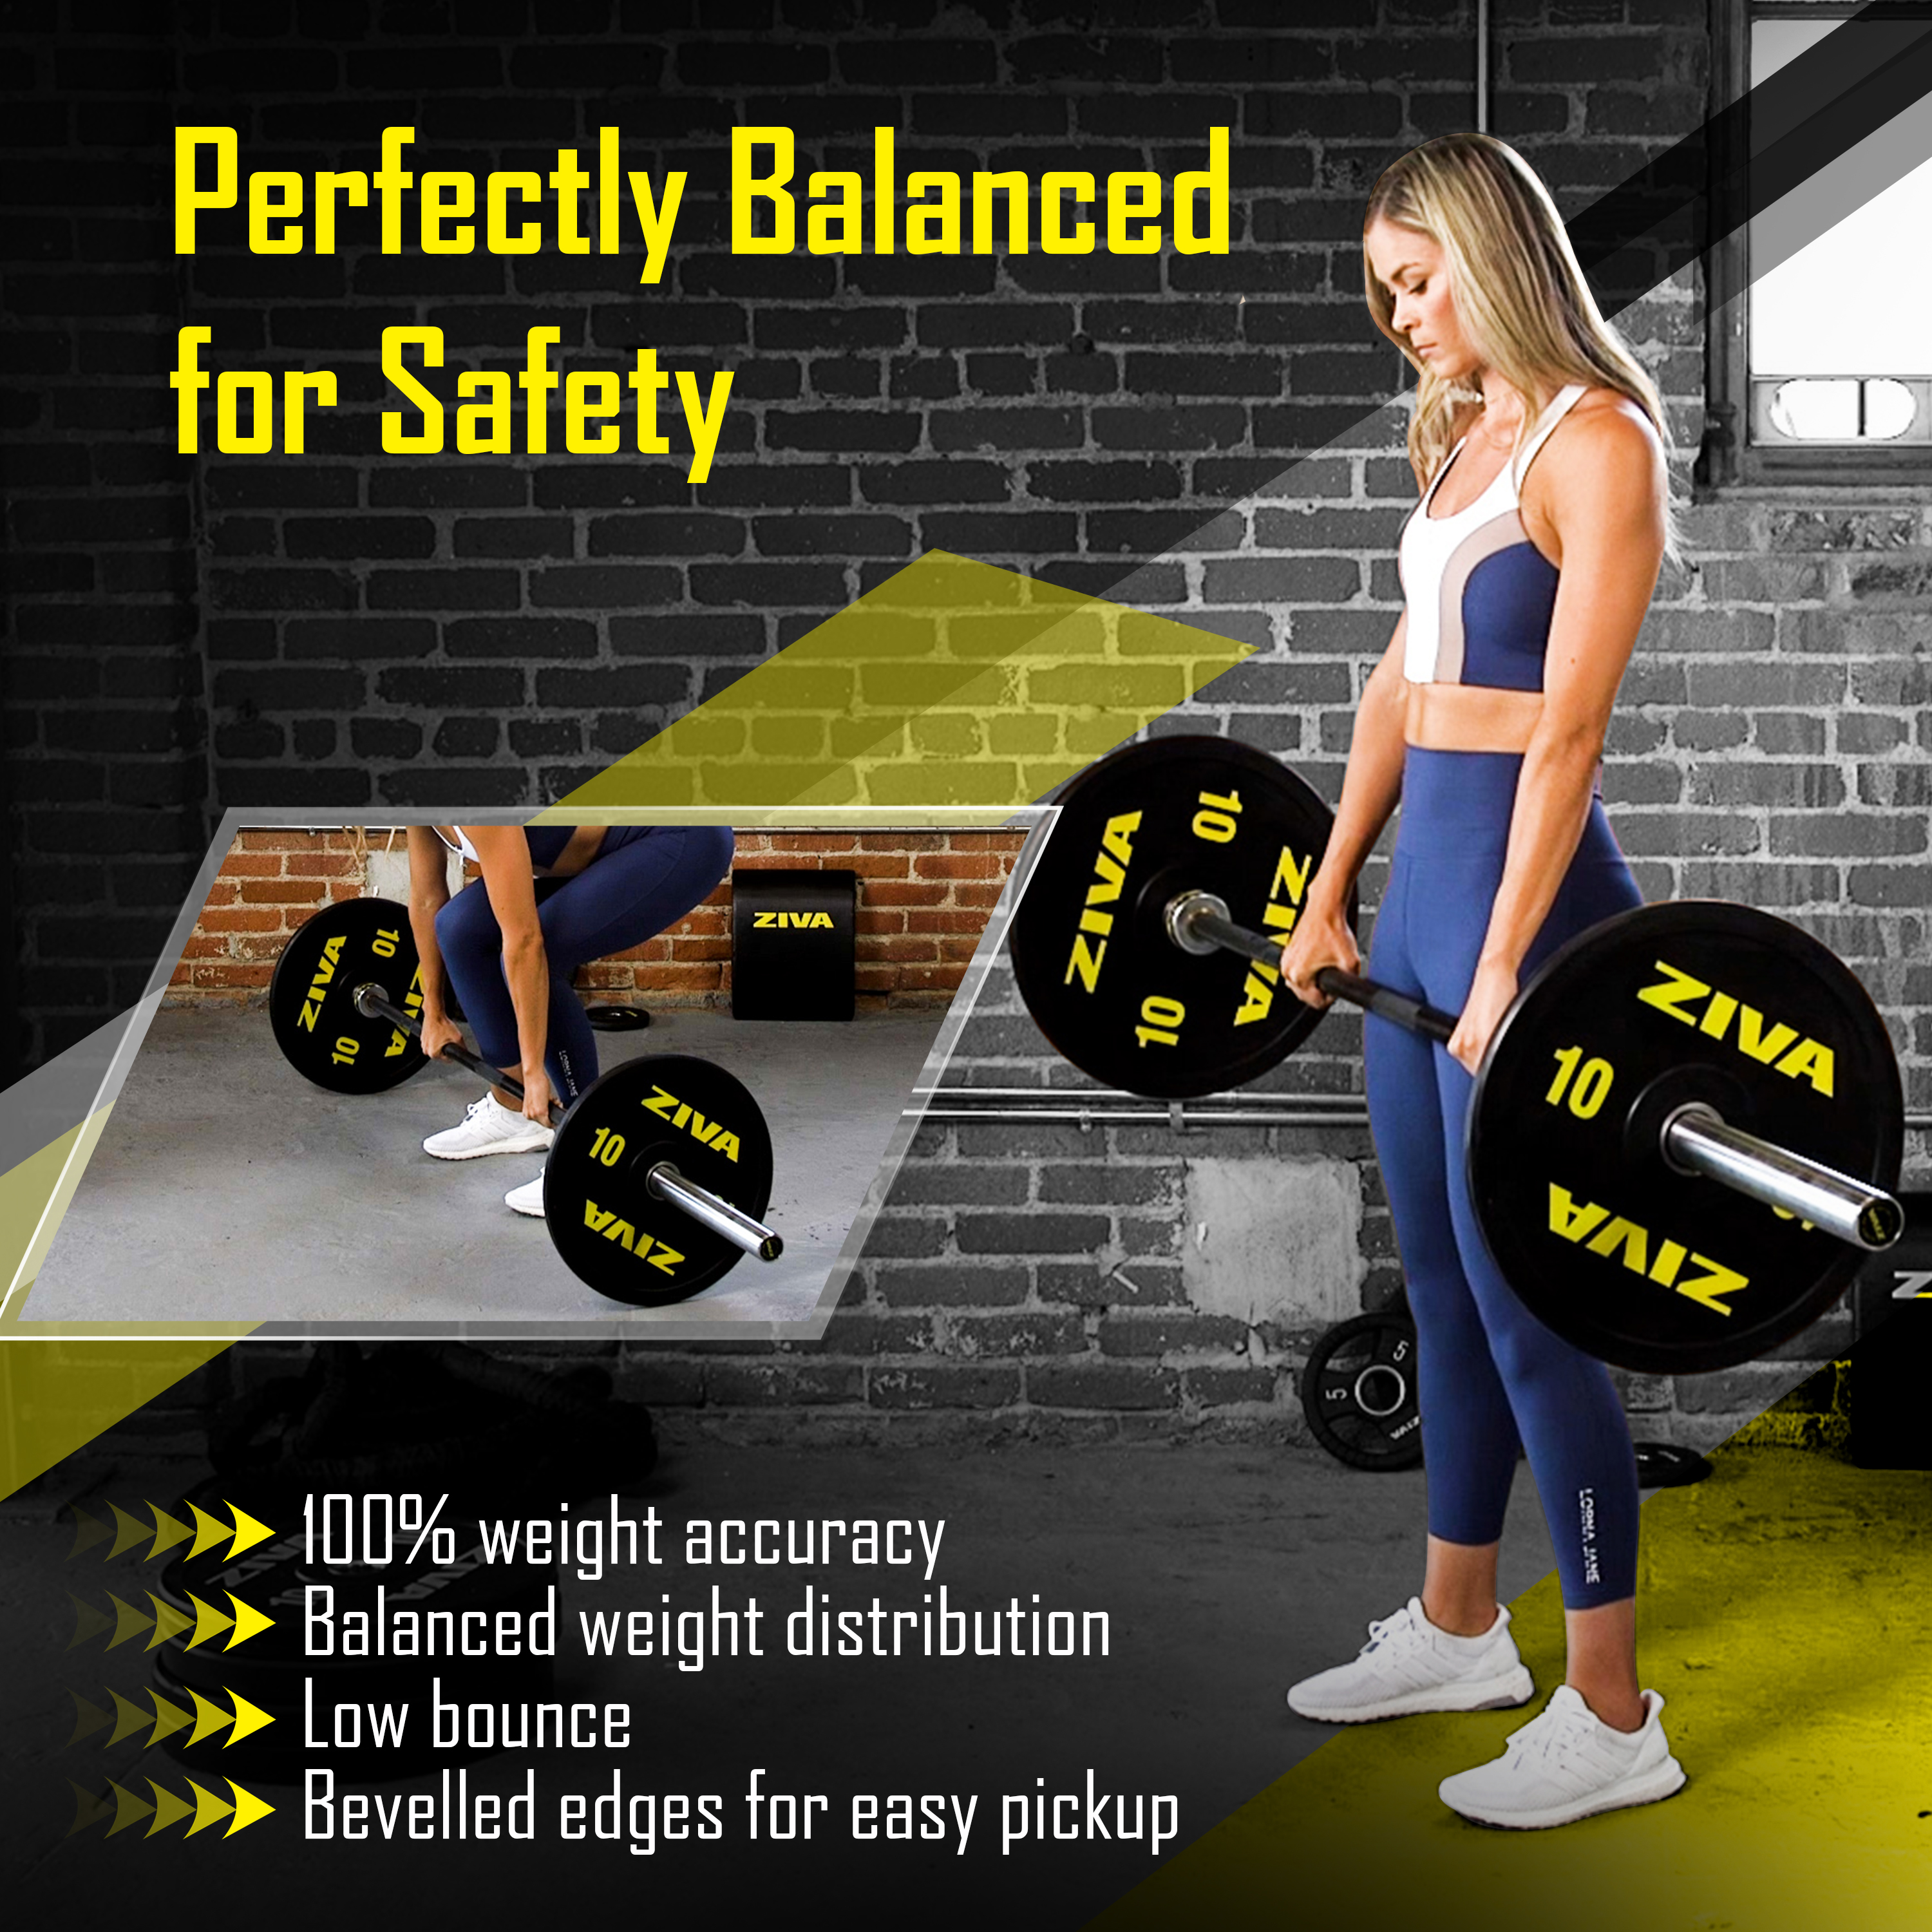 Perfectly balanced for safety. 100% weight accuracy, balanced weight distribution, low bounce, bevelled edges for easy pickup.